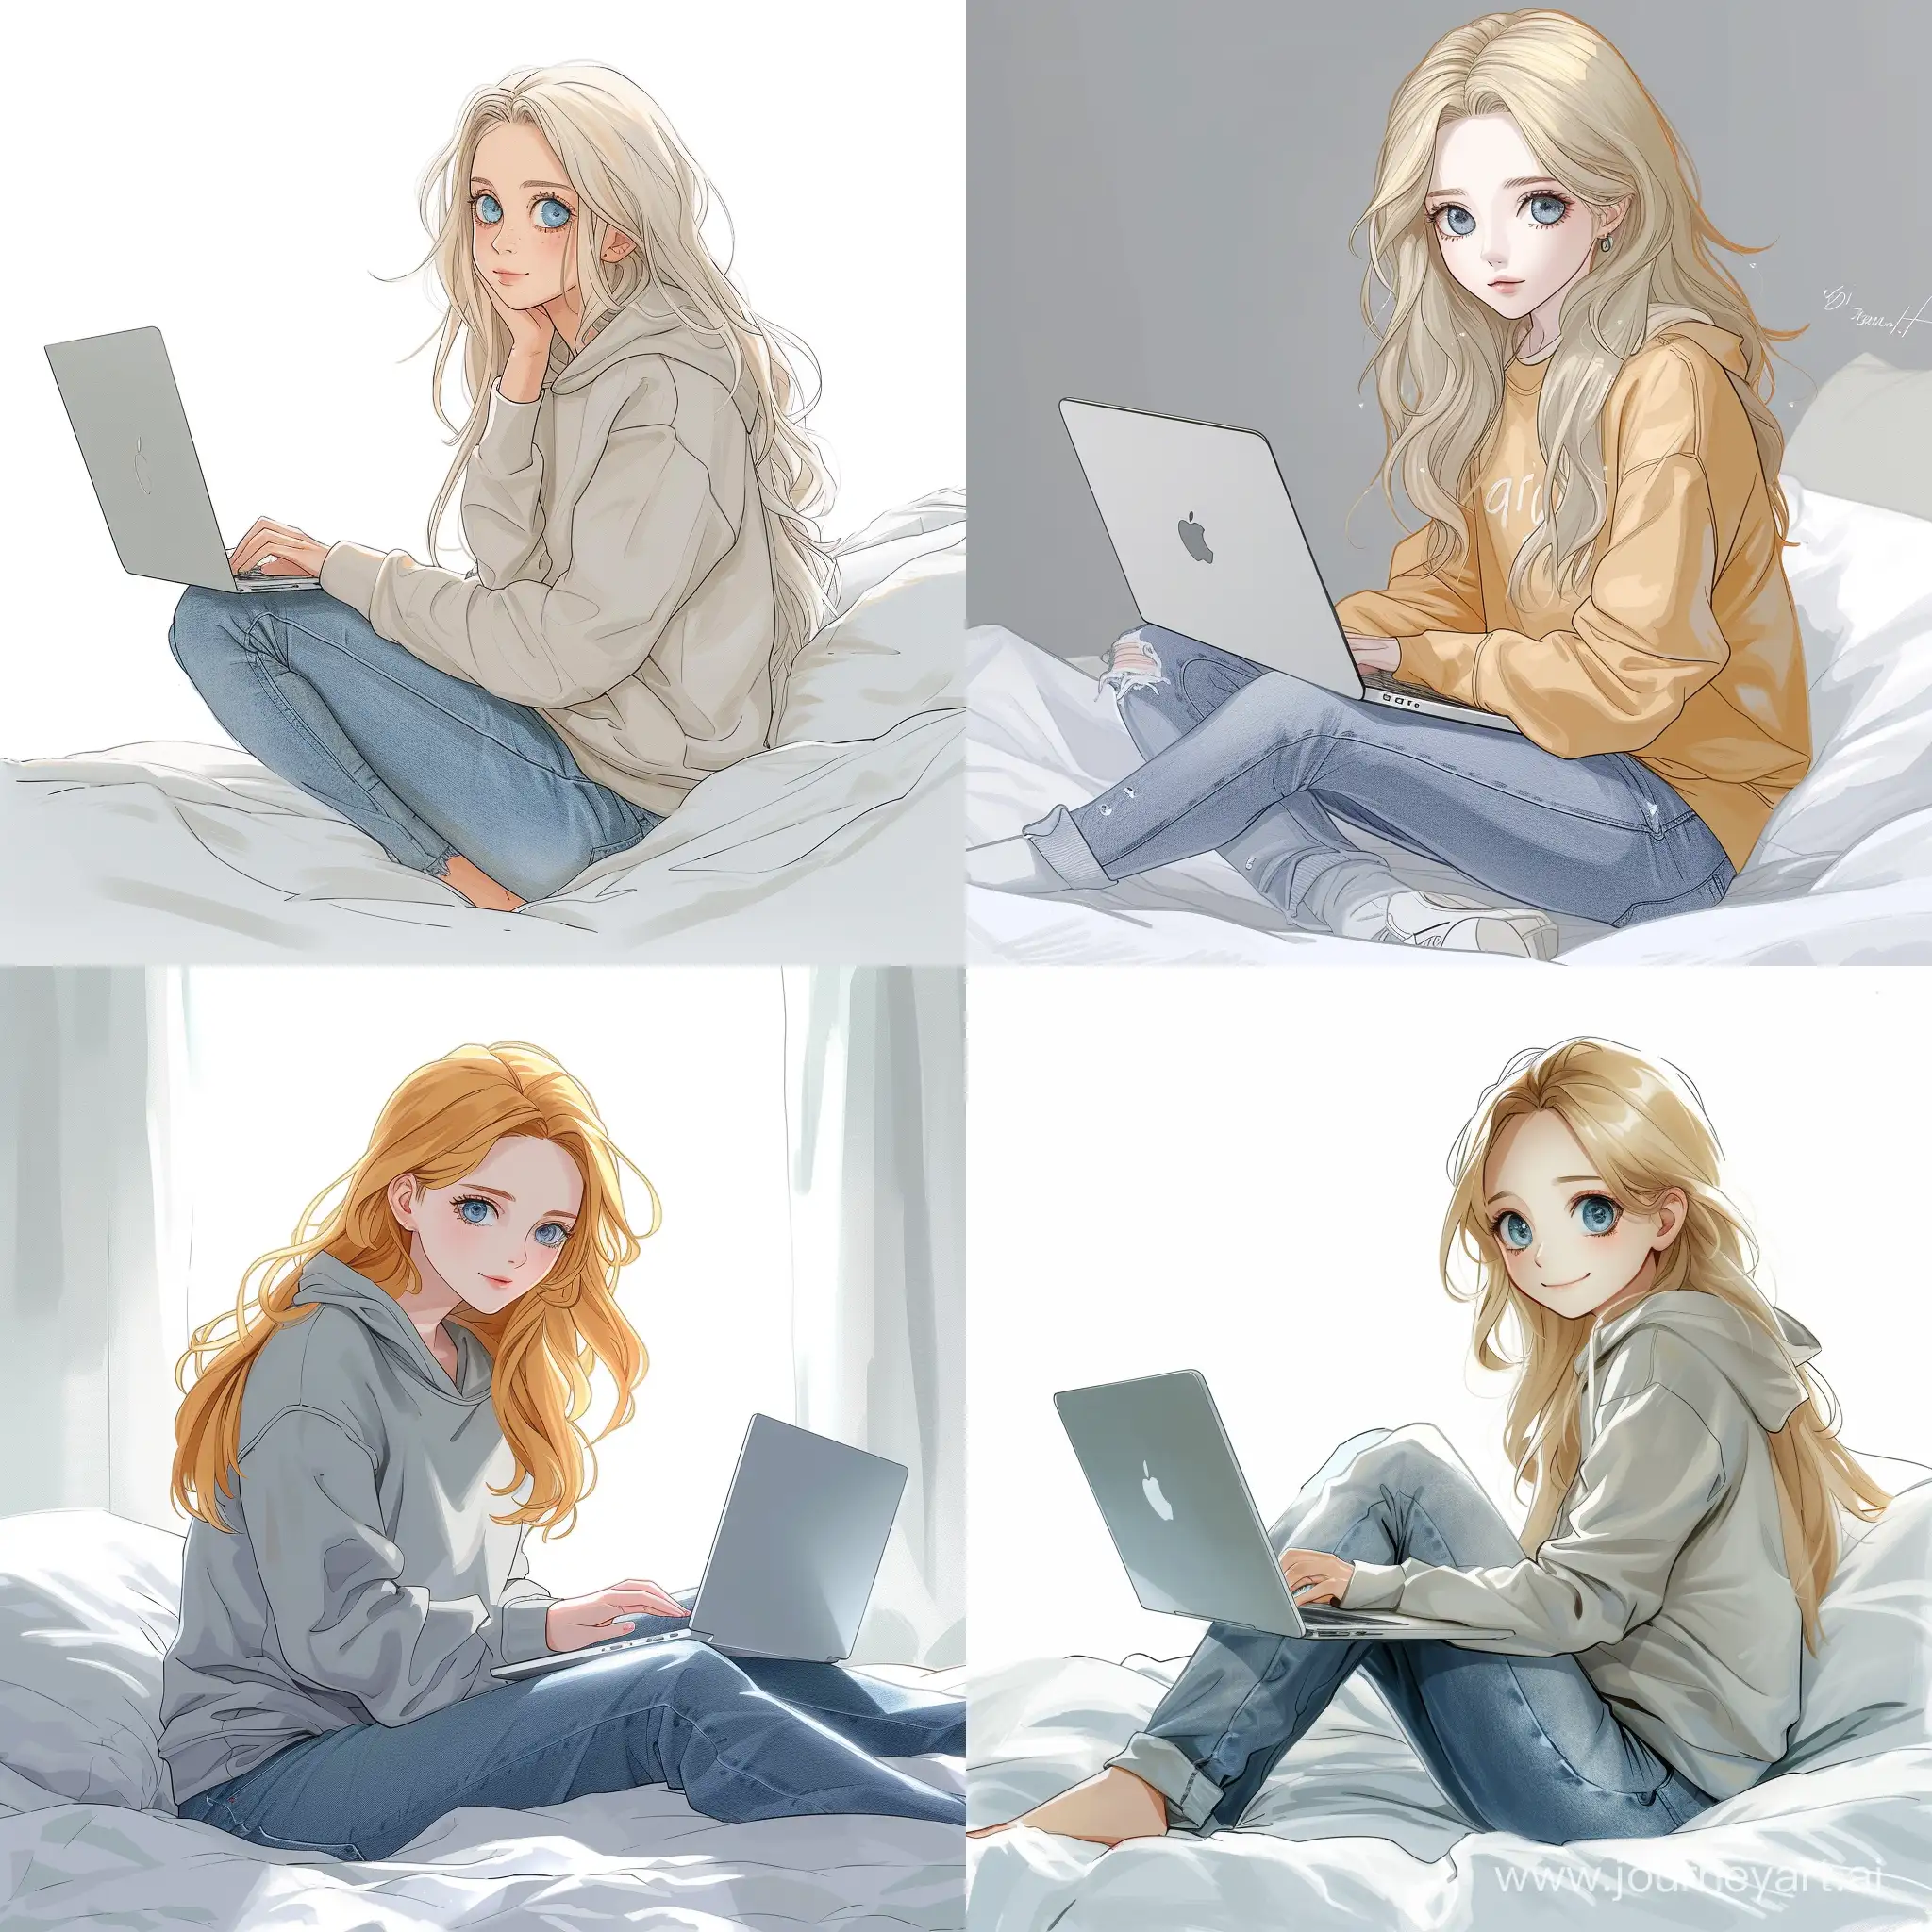 Stylish-Teenage-Girl-with-Laptop-on-Bed-High-Detail-Cartoon-Art